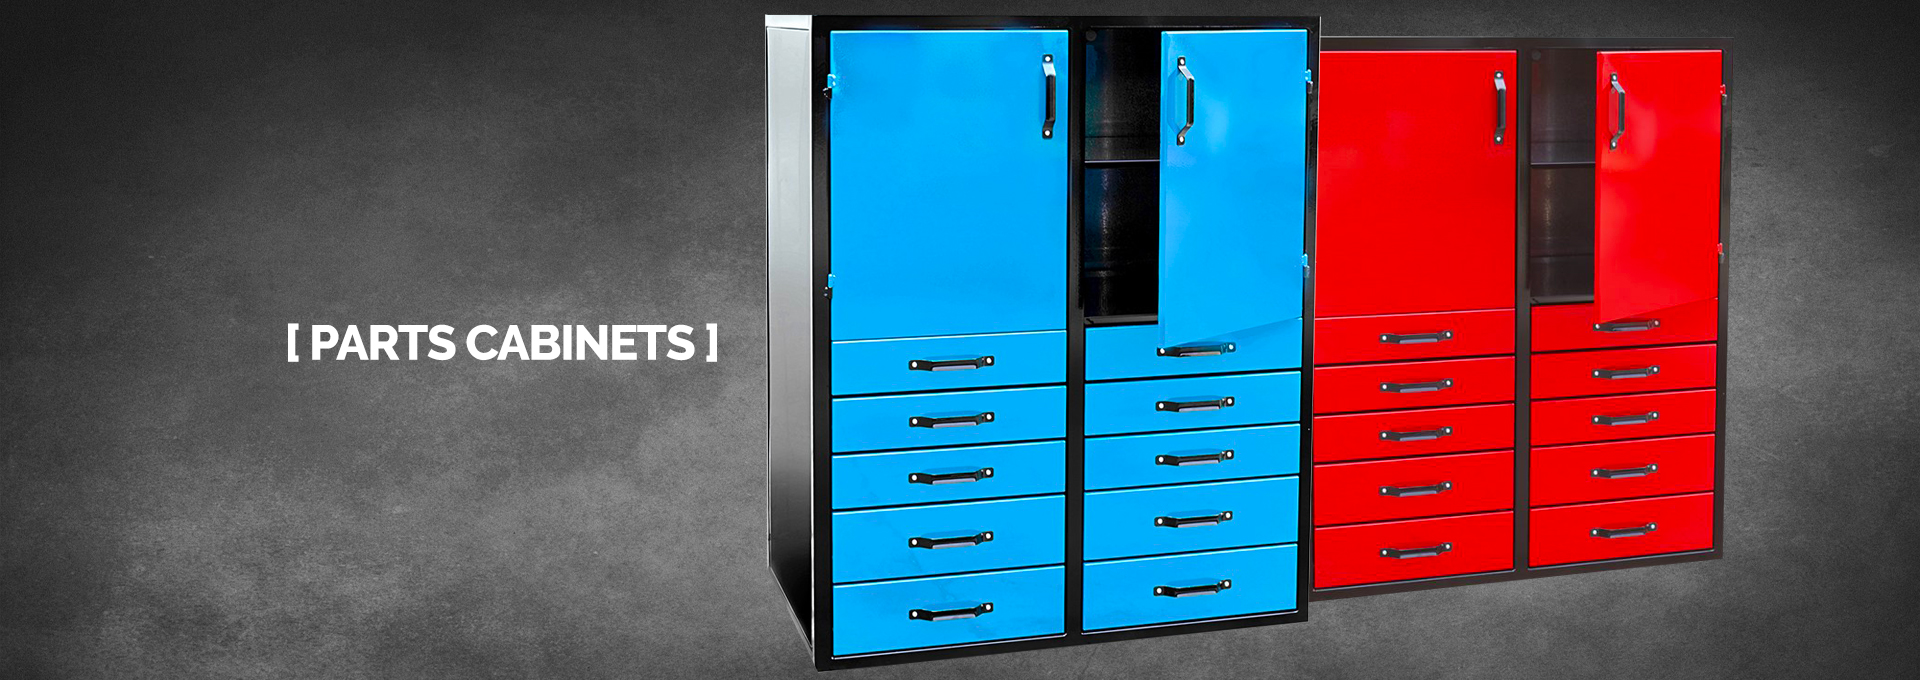 parts-cabinets